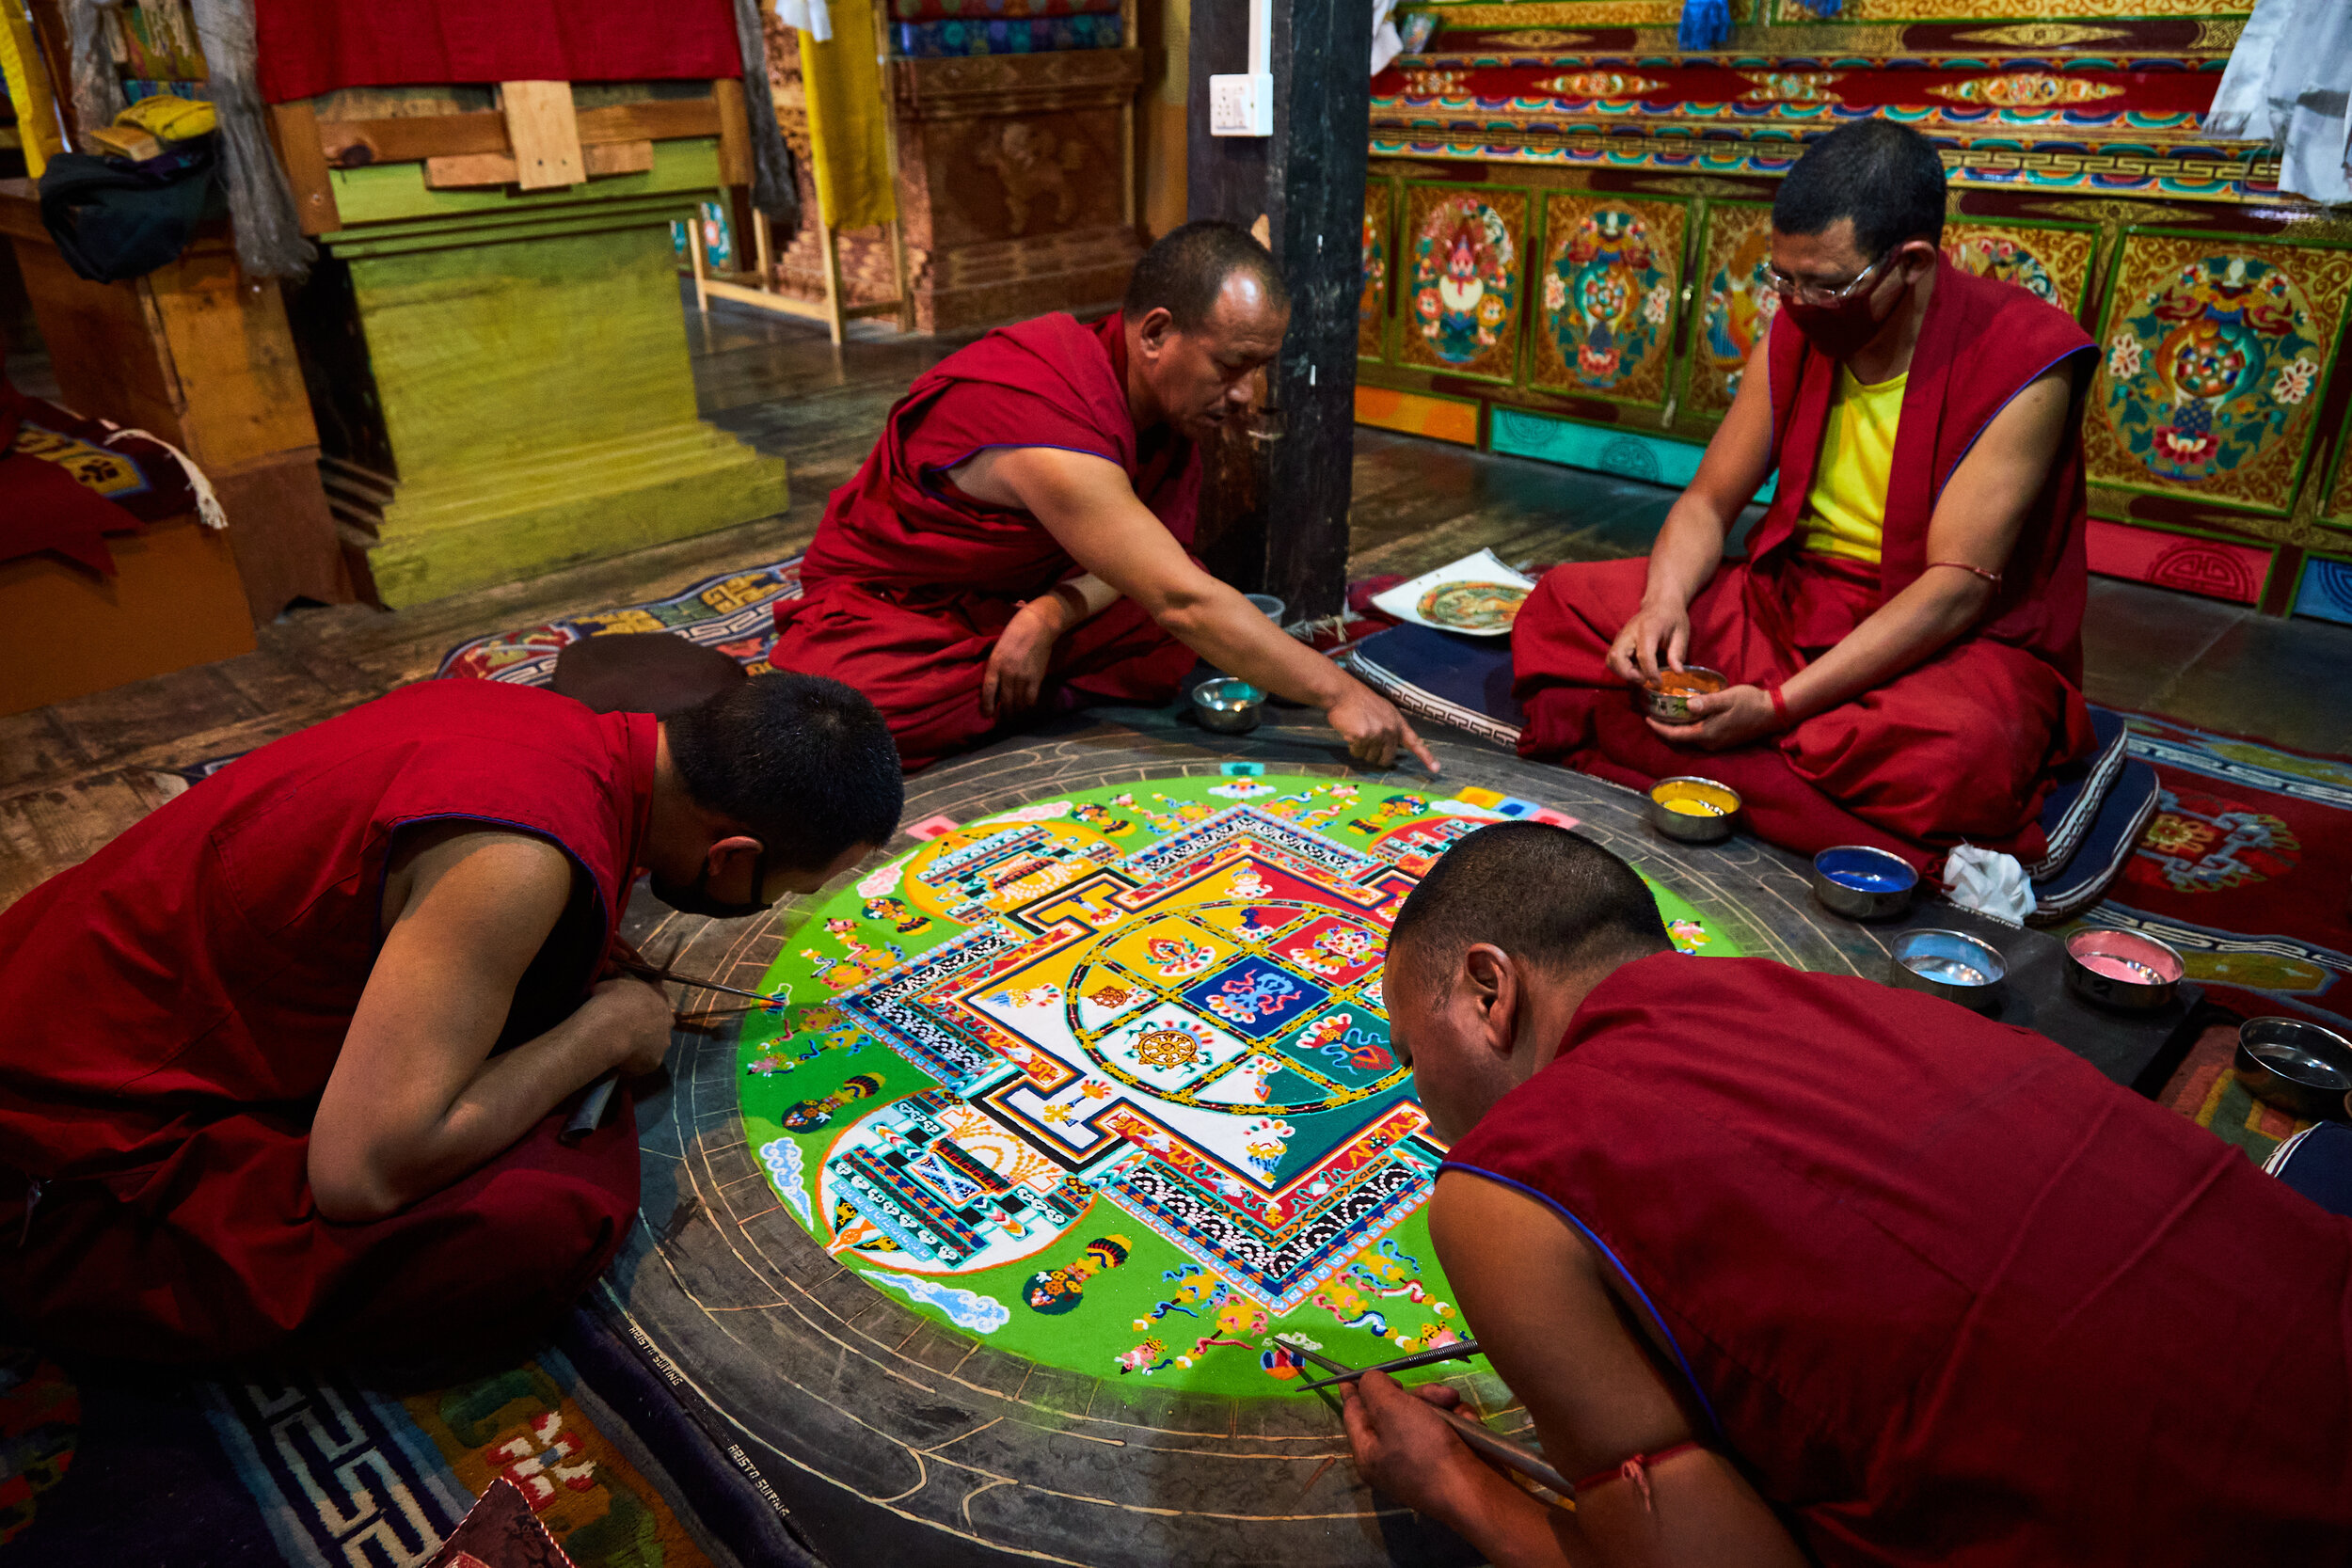  Mandala is a spiritual representation of the universe. Performing a mandala art is not a common occurrence, but a fascinating sight if one is lucky enough to be in the right place at the right time. Few monks creating mandala in Thiksey monastery. 